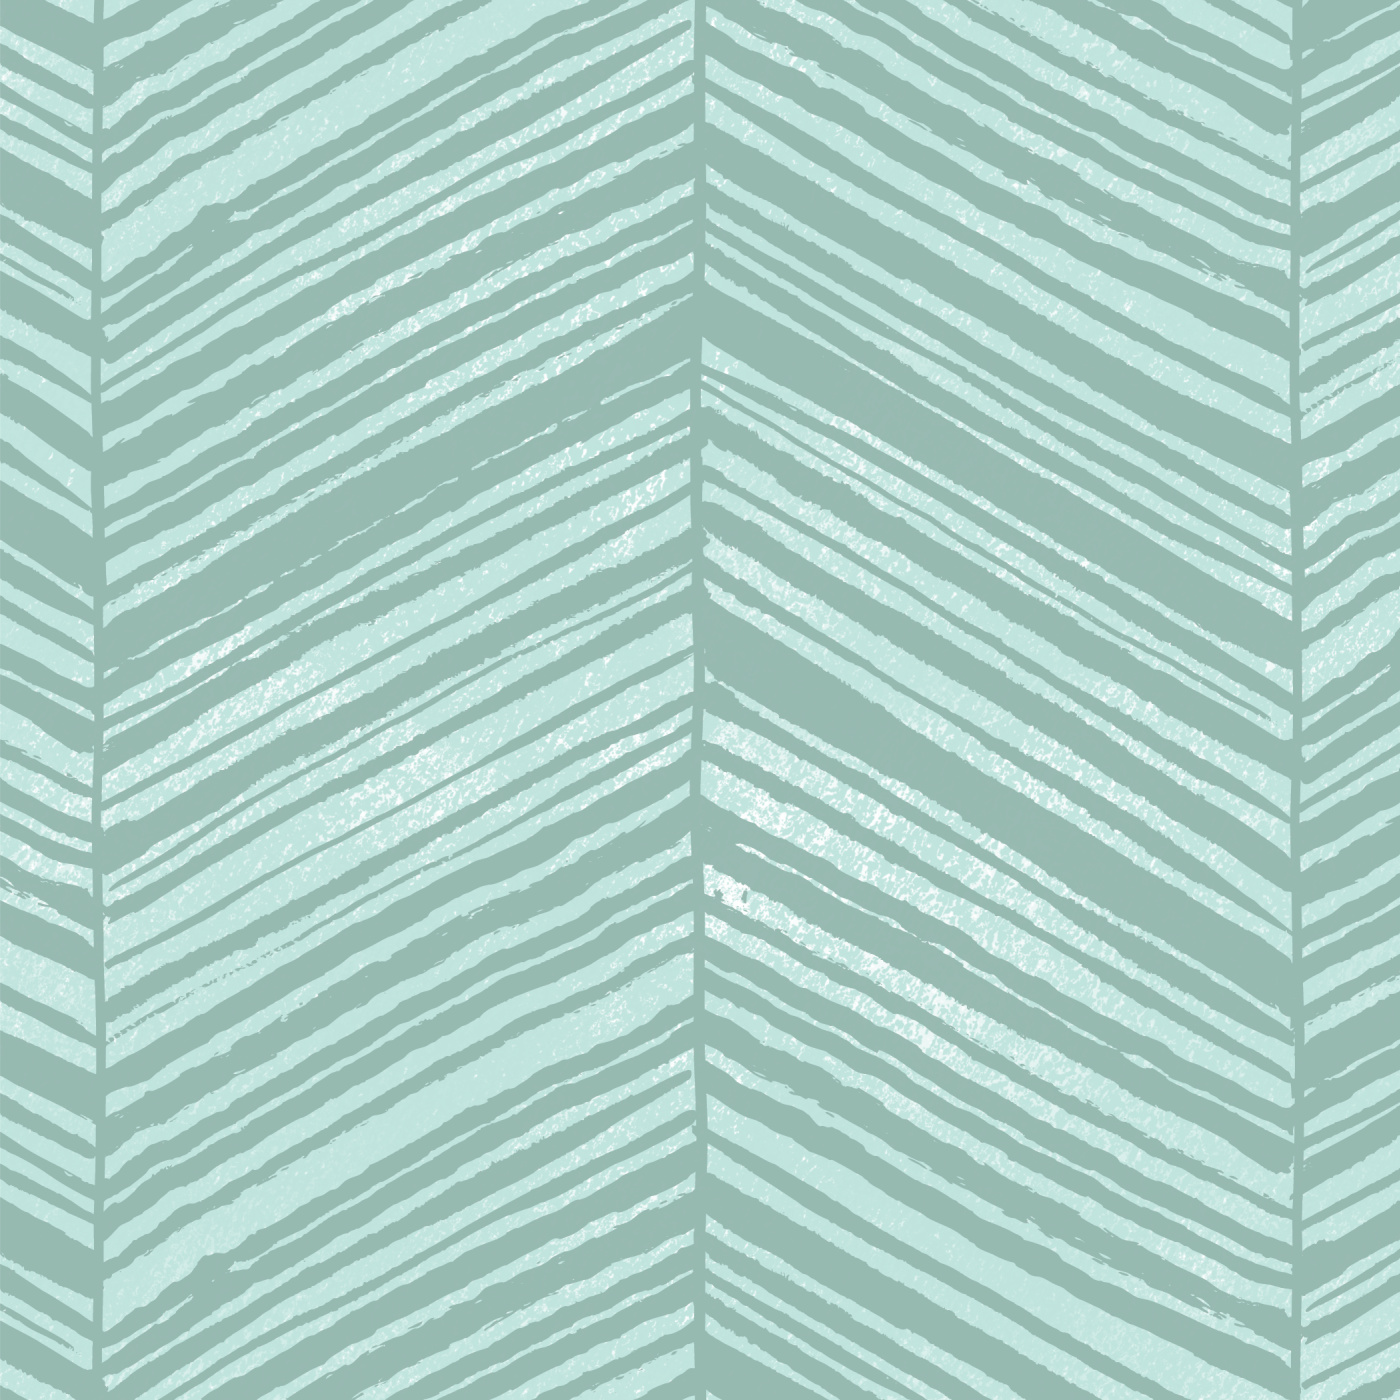 How to Install Paste-on-Wall Wallpaper - The Turquoise Home